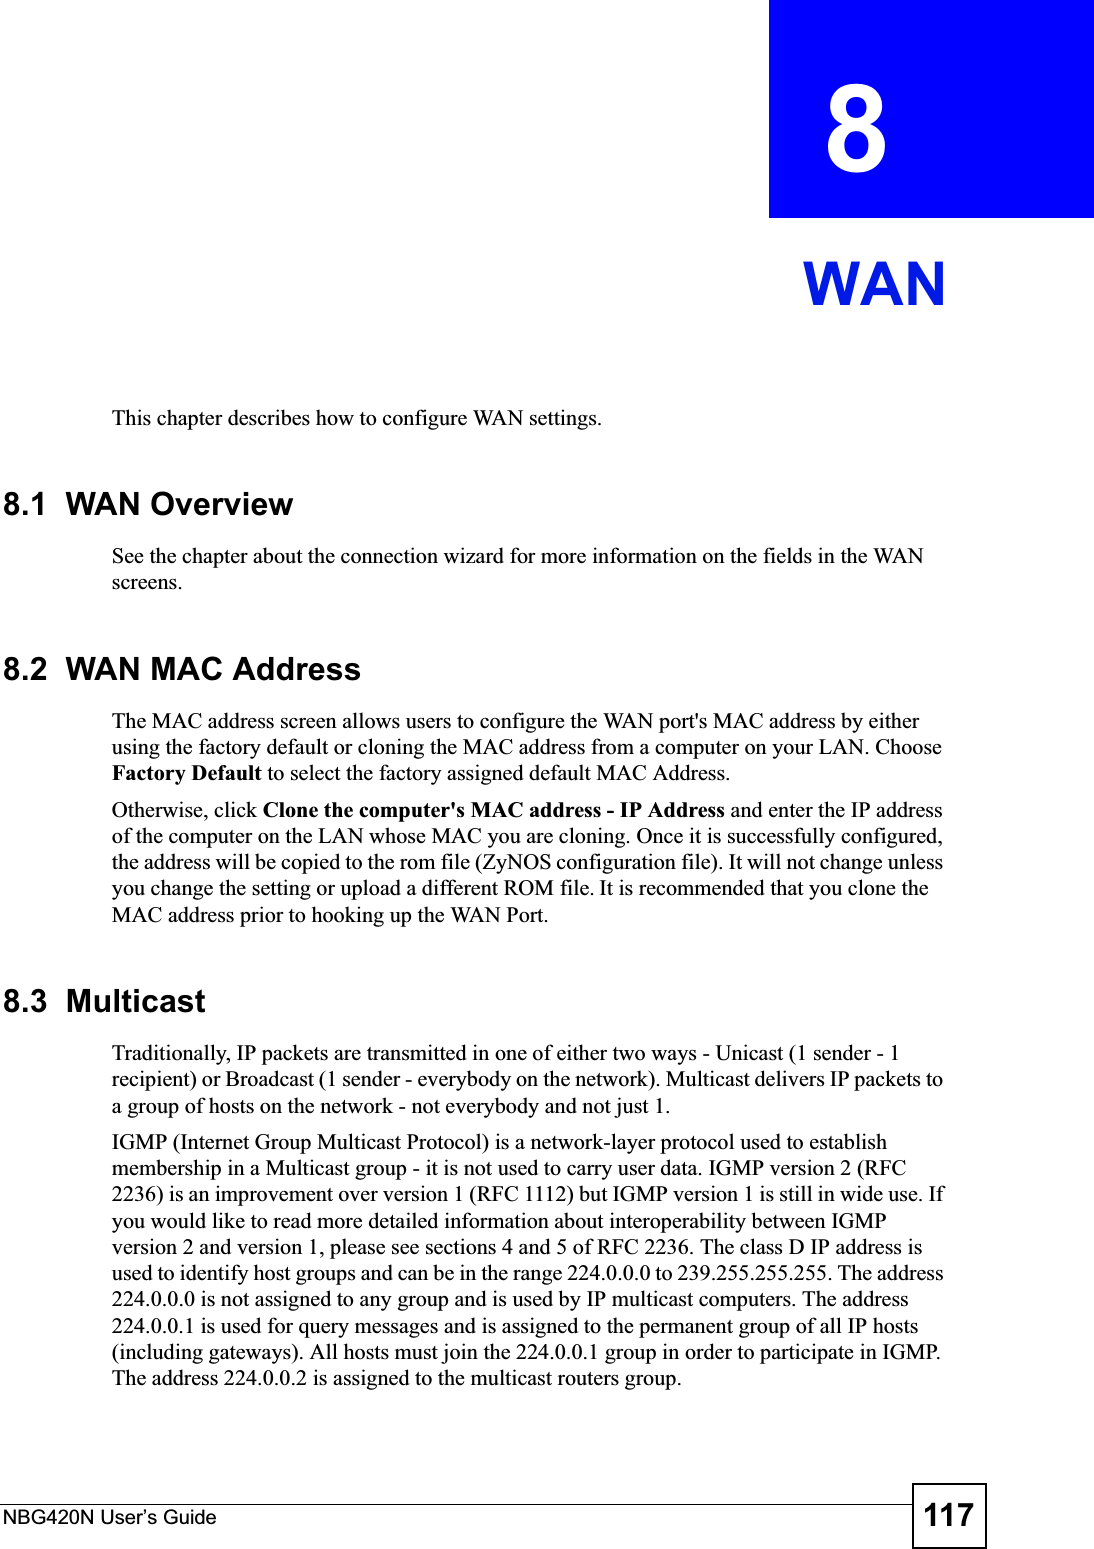 NBG420N User’s Guide 117CHAPTER  8 WANThis chapter describes how to configure WAN settings.8.1  WAN OverviewSee the chapter about the connection wizard for more information on the fields in the WAN screens.8.2  WAN MAC AddressThe MAC address screen allows users to configure the WAN port&apos;s MAC address by either using the factory default or cloning the MAC address from a computer on your LAN. Choose Factory Default to select the factory assigned default MAC Address.Otherwise, click Clone the computer&apos;s MAC address - IP Address and enter the IP address of the computer on the LAN whose MAC you are cloning. Once it is successfully configured, the address will be copied to the rom file (ZyNOS configuration file). It will not change unless you change the setting or upload a different ROM file. It is recommended that you clone the MAC address prior to hooking up the WAN Port.8.3  MulticastTraditionally, IP packets are transmitted in one of either two ways - Unicast (1 sender - 1 recipient) or Broadcast (1 sender - everybody on the network). Multicast delivers IP packets to a group of hosts on the network - not everybody and not just 1. IGMP (Internet Group Multicast Protocol) is a network-layer protocol used to establish membership in a Multicast group - it is not used to carry user data. IGMP version 2 (RFC 2236) is an improvement over version 1 (RFC 1112) but IGMP version 1 is still in wide use. If you would like to read more detailed information about interoperability between IGMP version 2 and version 1, please see sections 4 and 5 of RFC 2236. The class D IP address is used to identify host groups and can be in the range 224.0.0.0 to 239.255.255.255. The address 224.0.0.0 is not assigned to any group and is used by IP multicast computers. The address 224.0.0.1 is used for query messages and is assigned to the permanent group of all IP hosts (including gateways). All hosts must join the 224.0.0.1 group in order to participate in IGMP. The address 224.0.0.2 is assigned to the multicast routers group. 